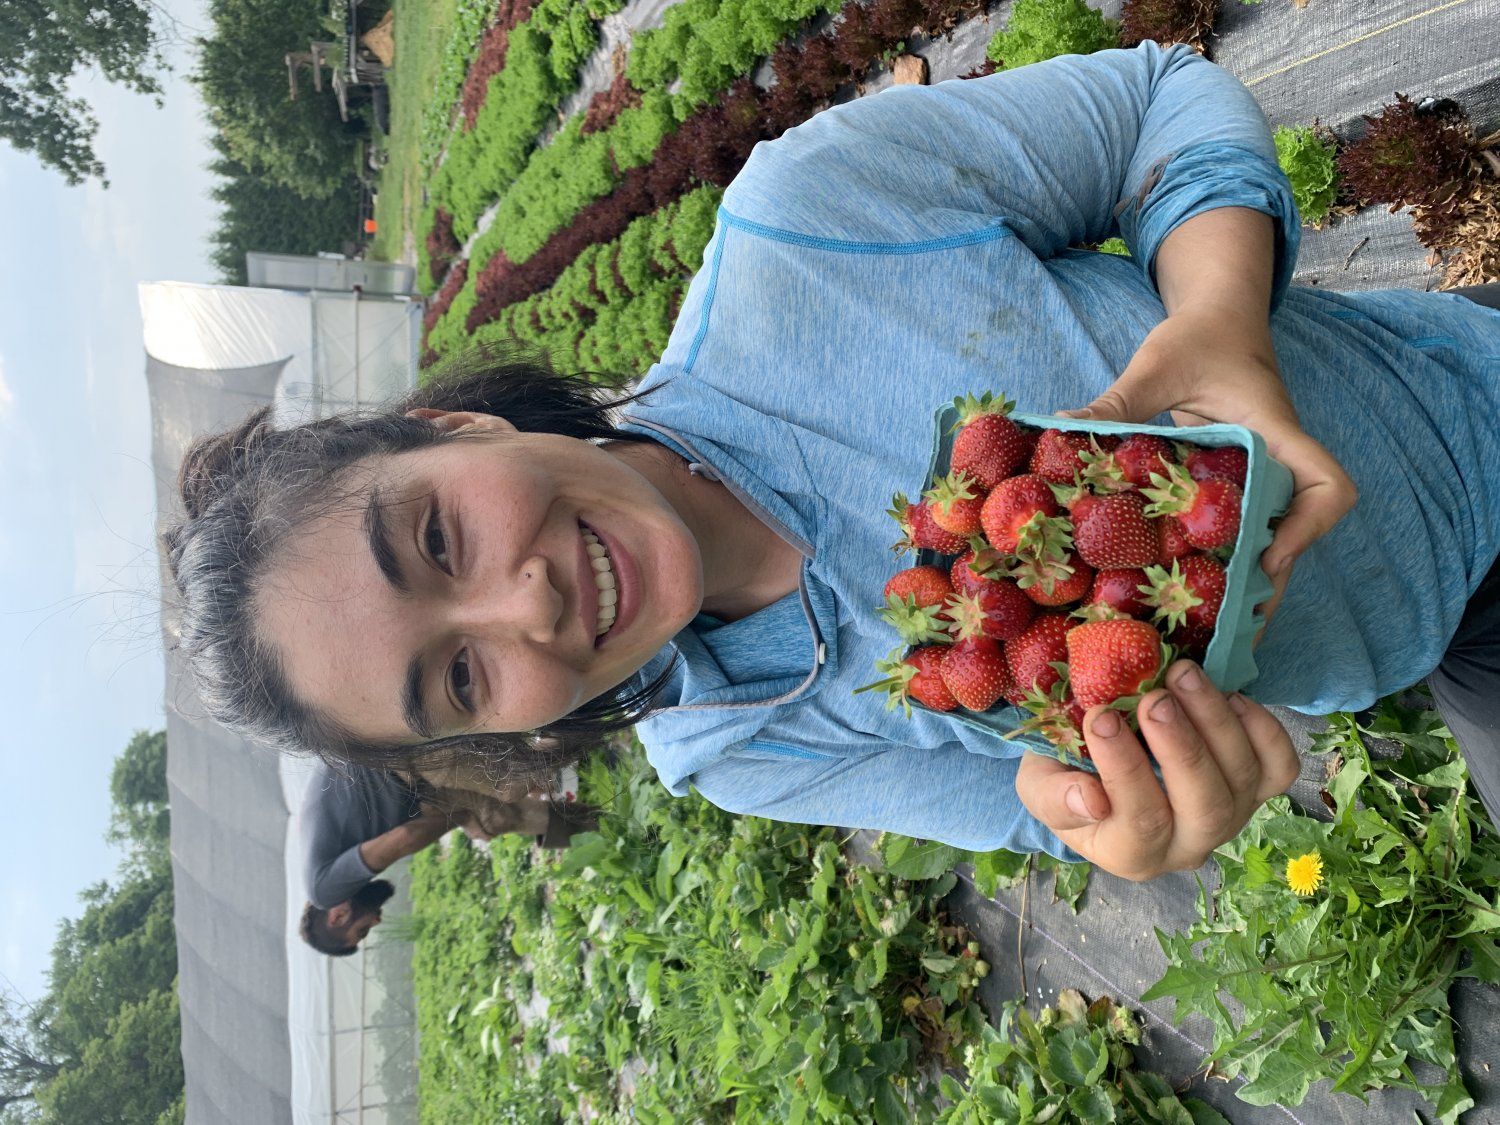 Previous Happening: Farm Happenings for May 29, 2021